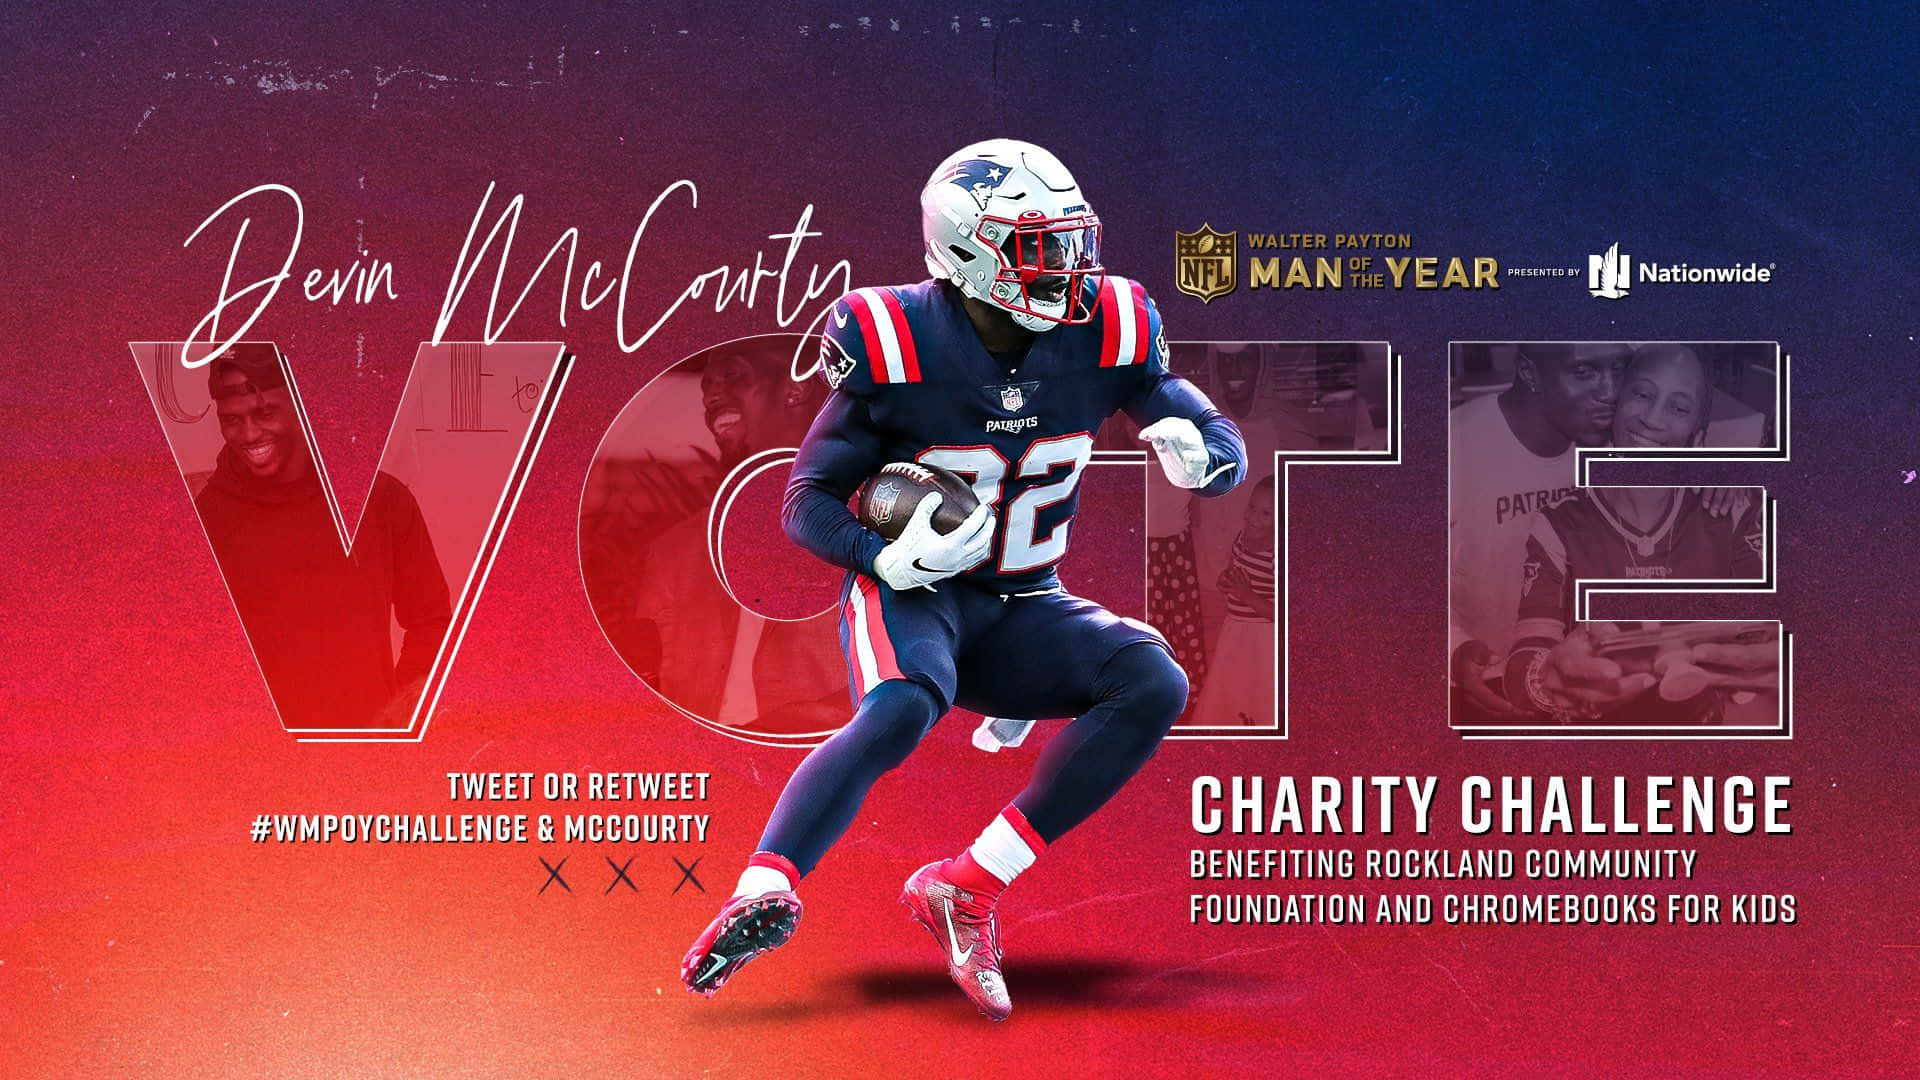 Devin McCourty in action during a game Wallpaper